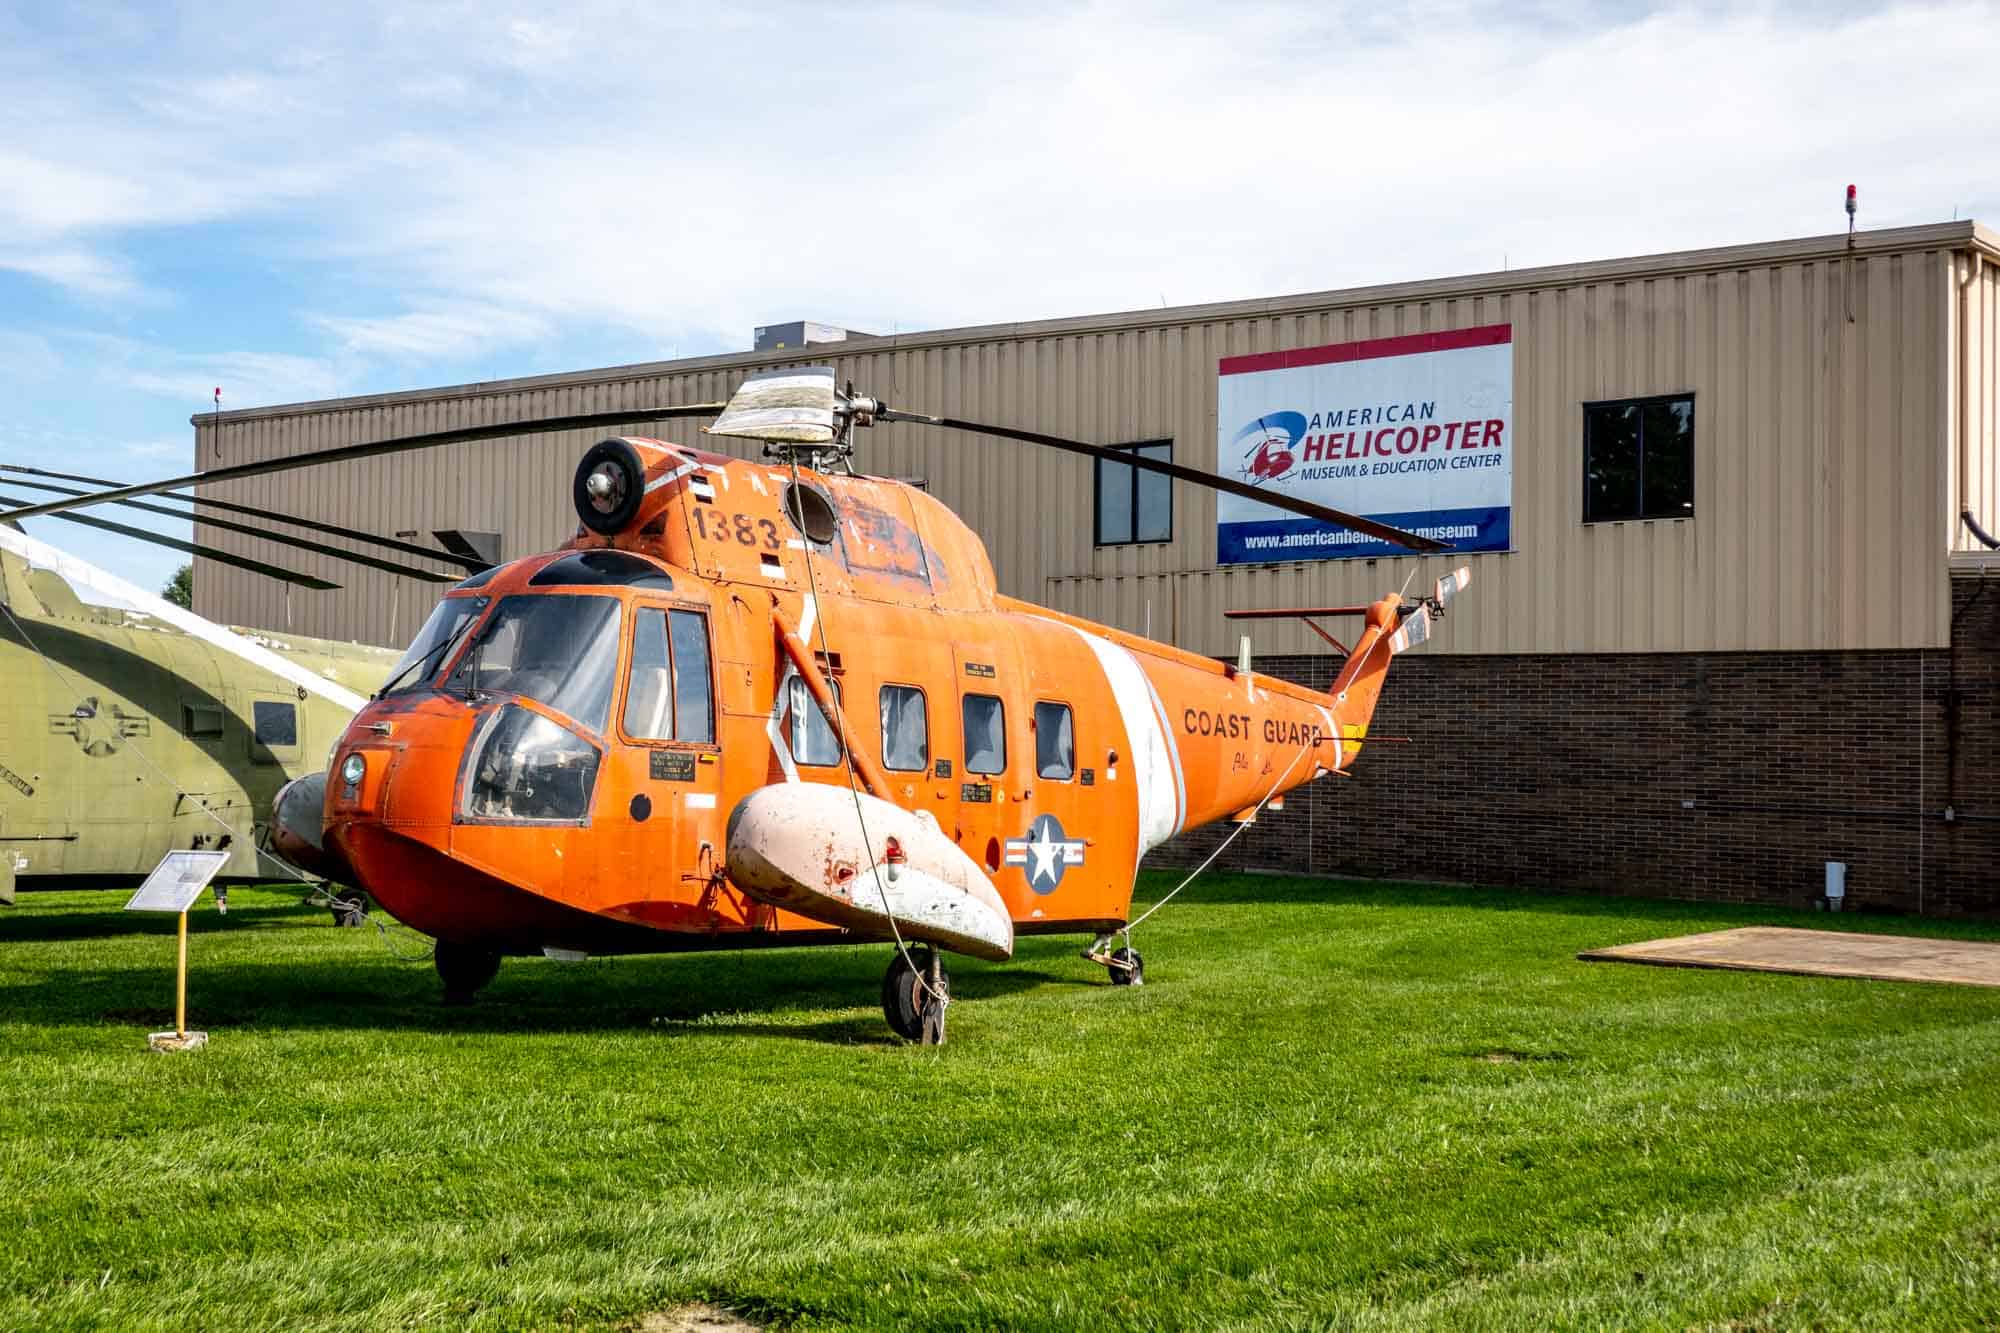 Orange Coast Guard helicopter displayed outside a building with signage for "American Helicopter Museum & Education Center"